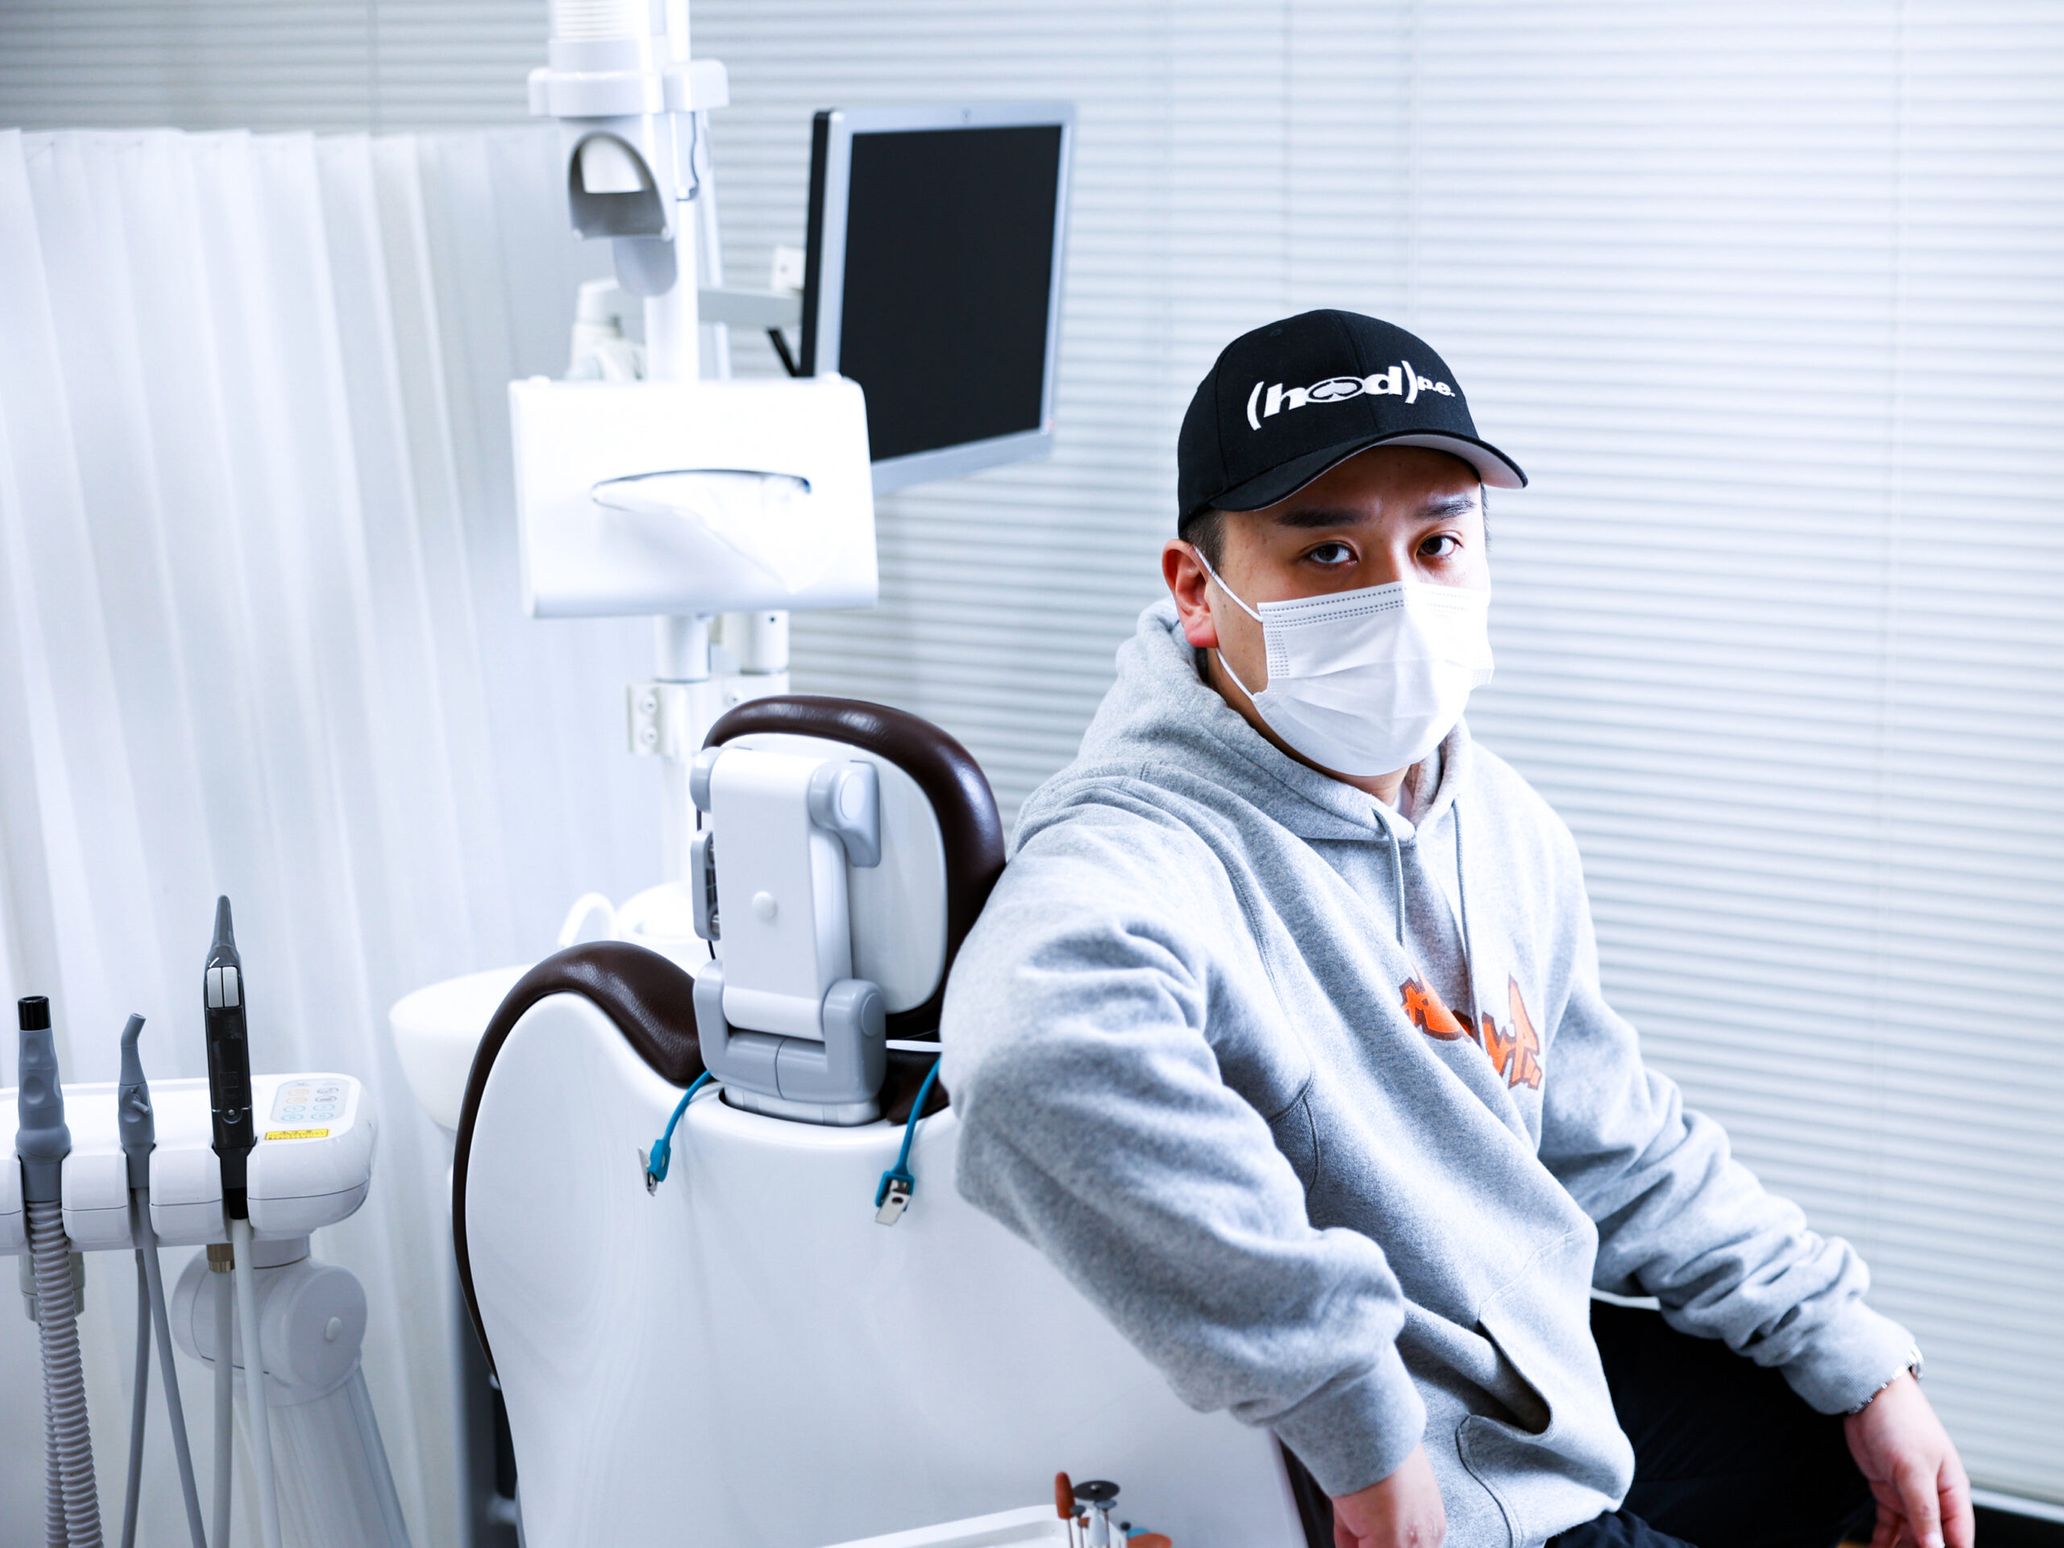 Dentist by Day, Dental Grill Expert by Night: Dr. Zara and the Culture of Customizing Teeth